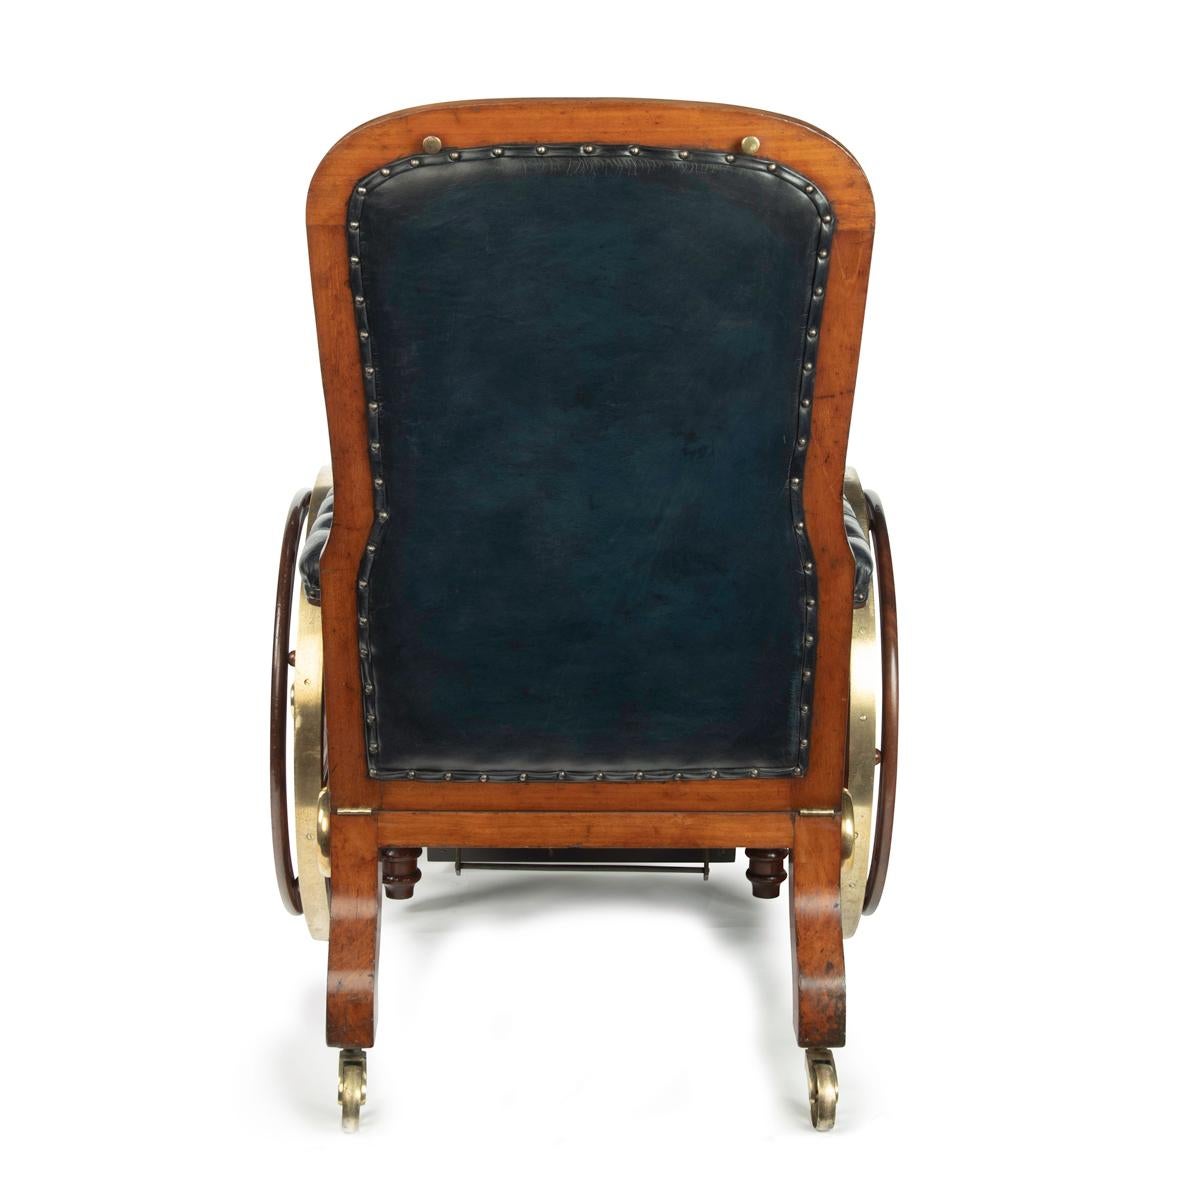 Leather A patented mechanical campaign invalid chair by Chapman For Sale